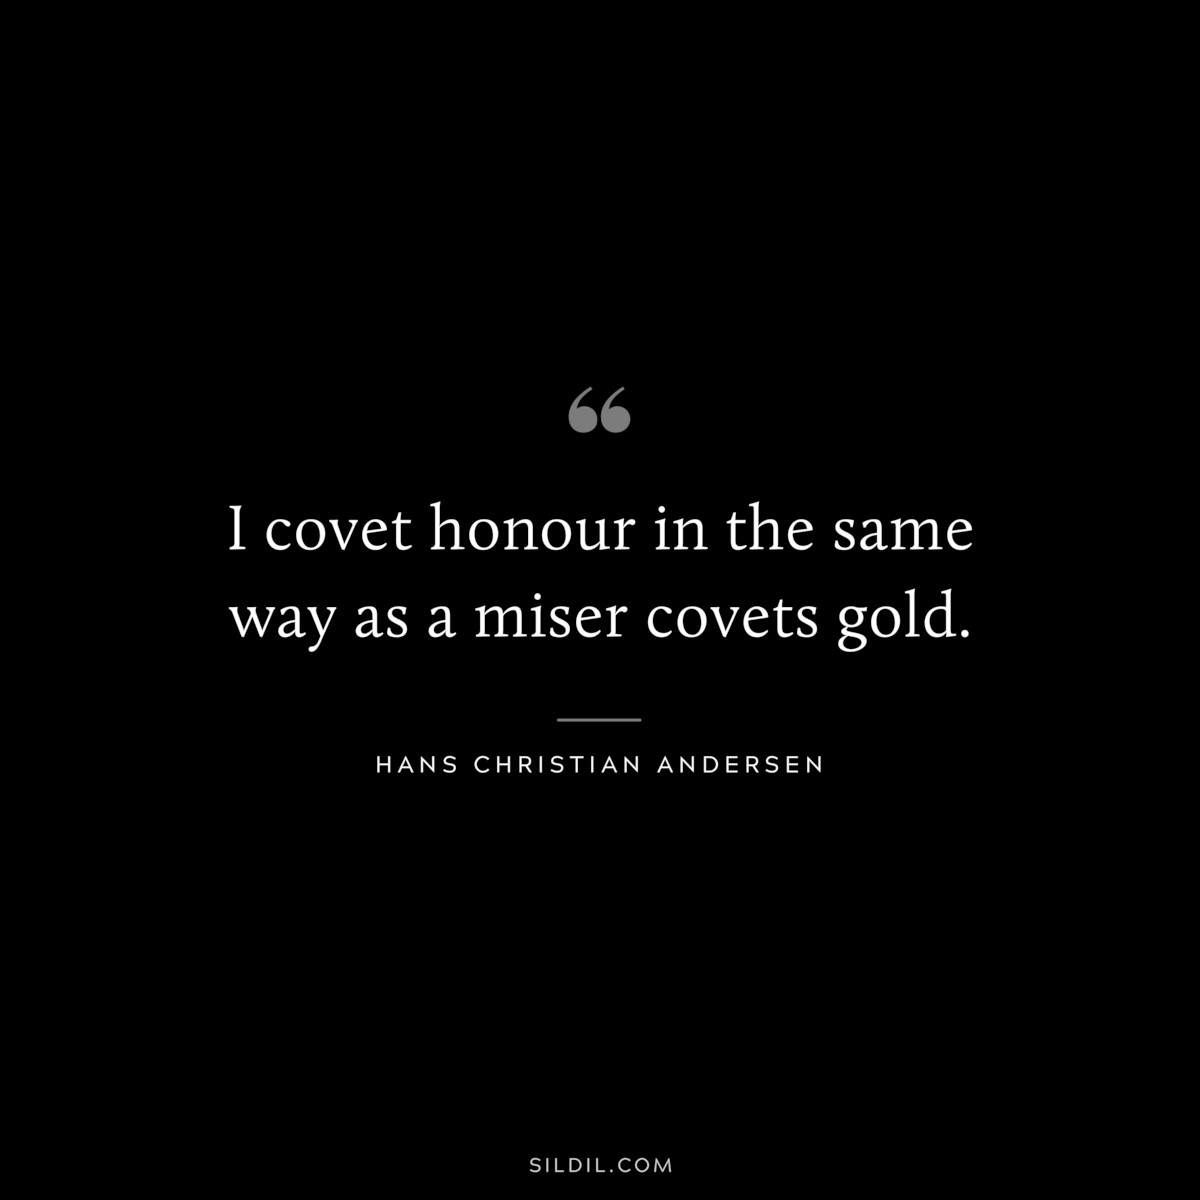 I covet honour in the same way as a miser covets gold. ― Hans Christian Andersen